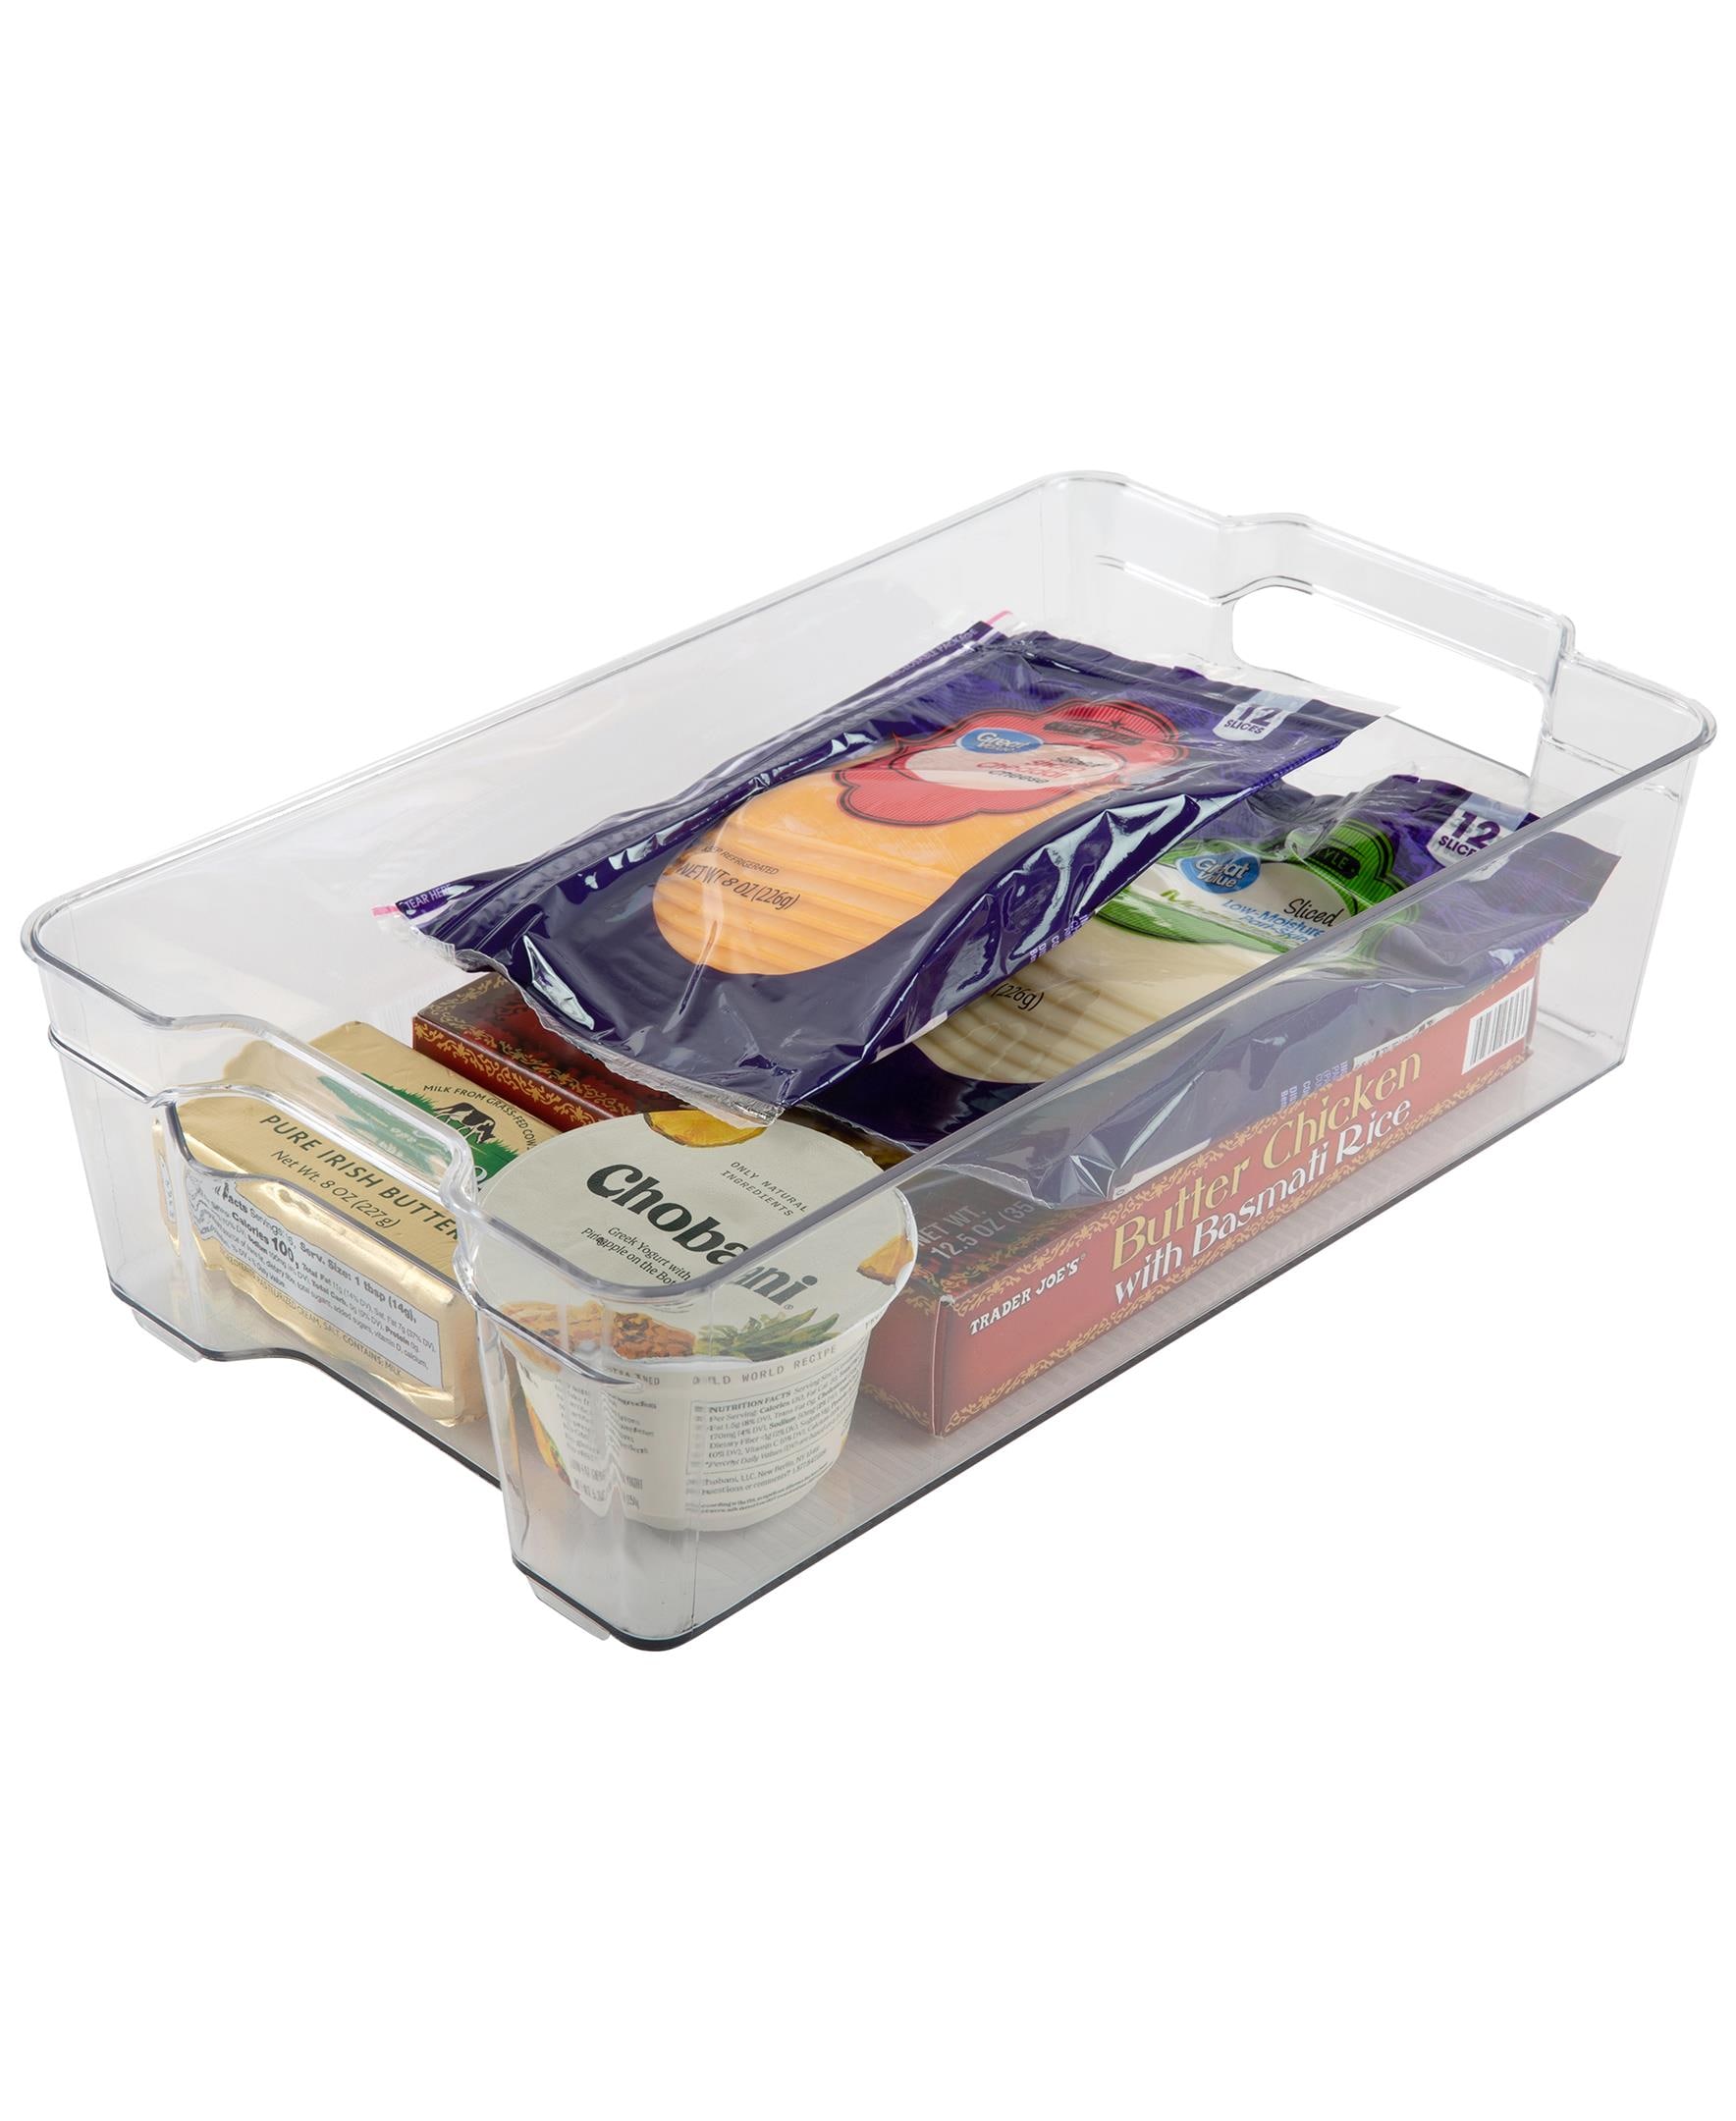 Clear Plastic Food Storage Containers at